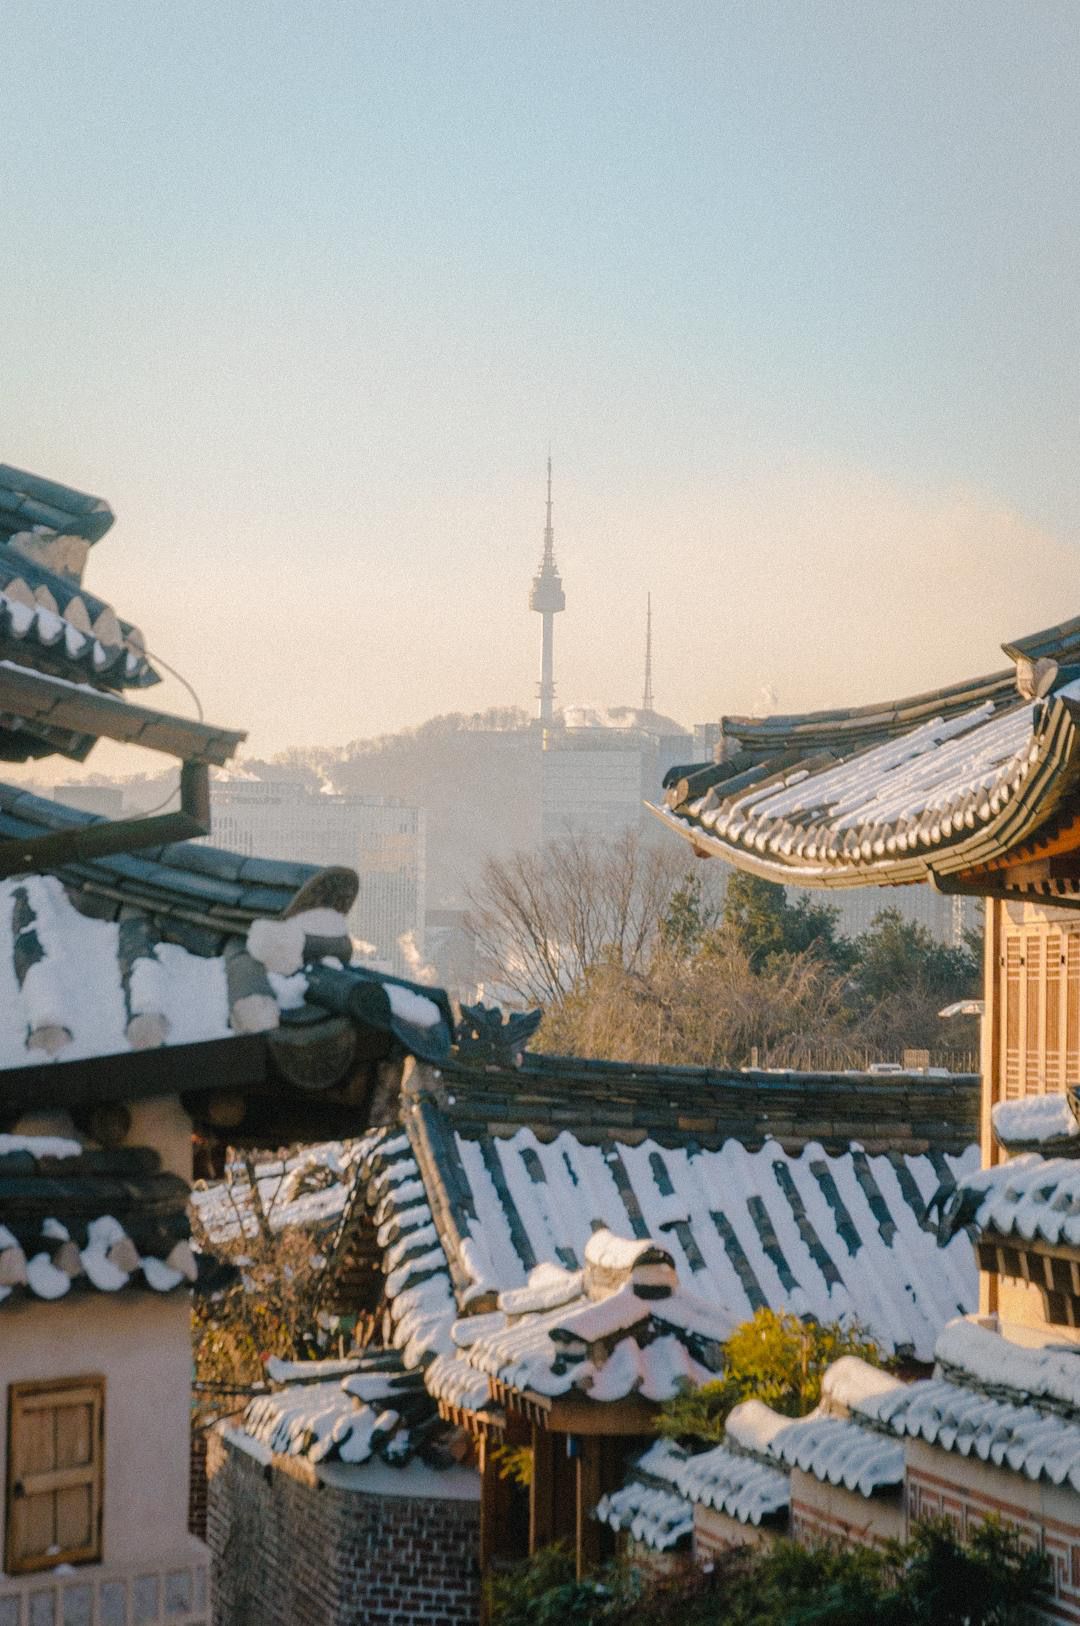 A snow-covered traditional Korean house with Namsan Tower in the background - Seoul